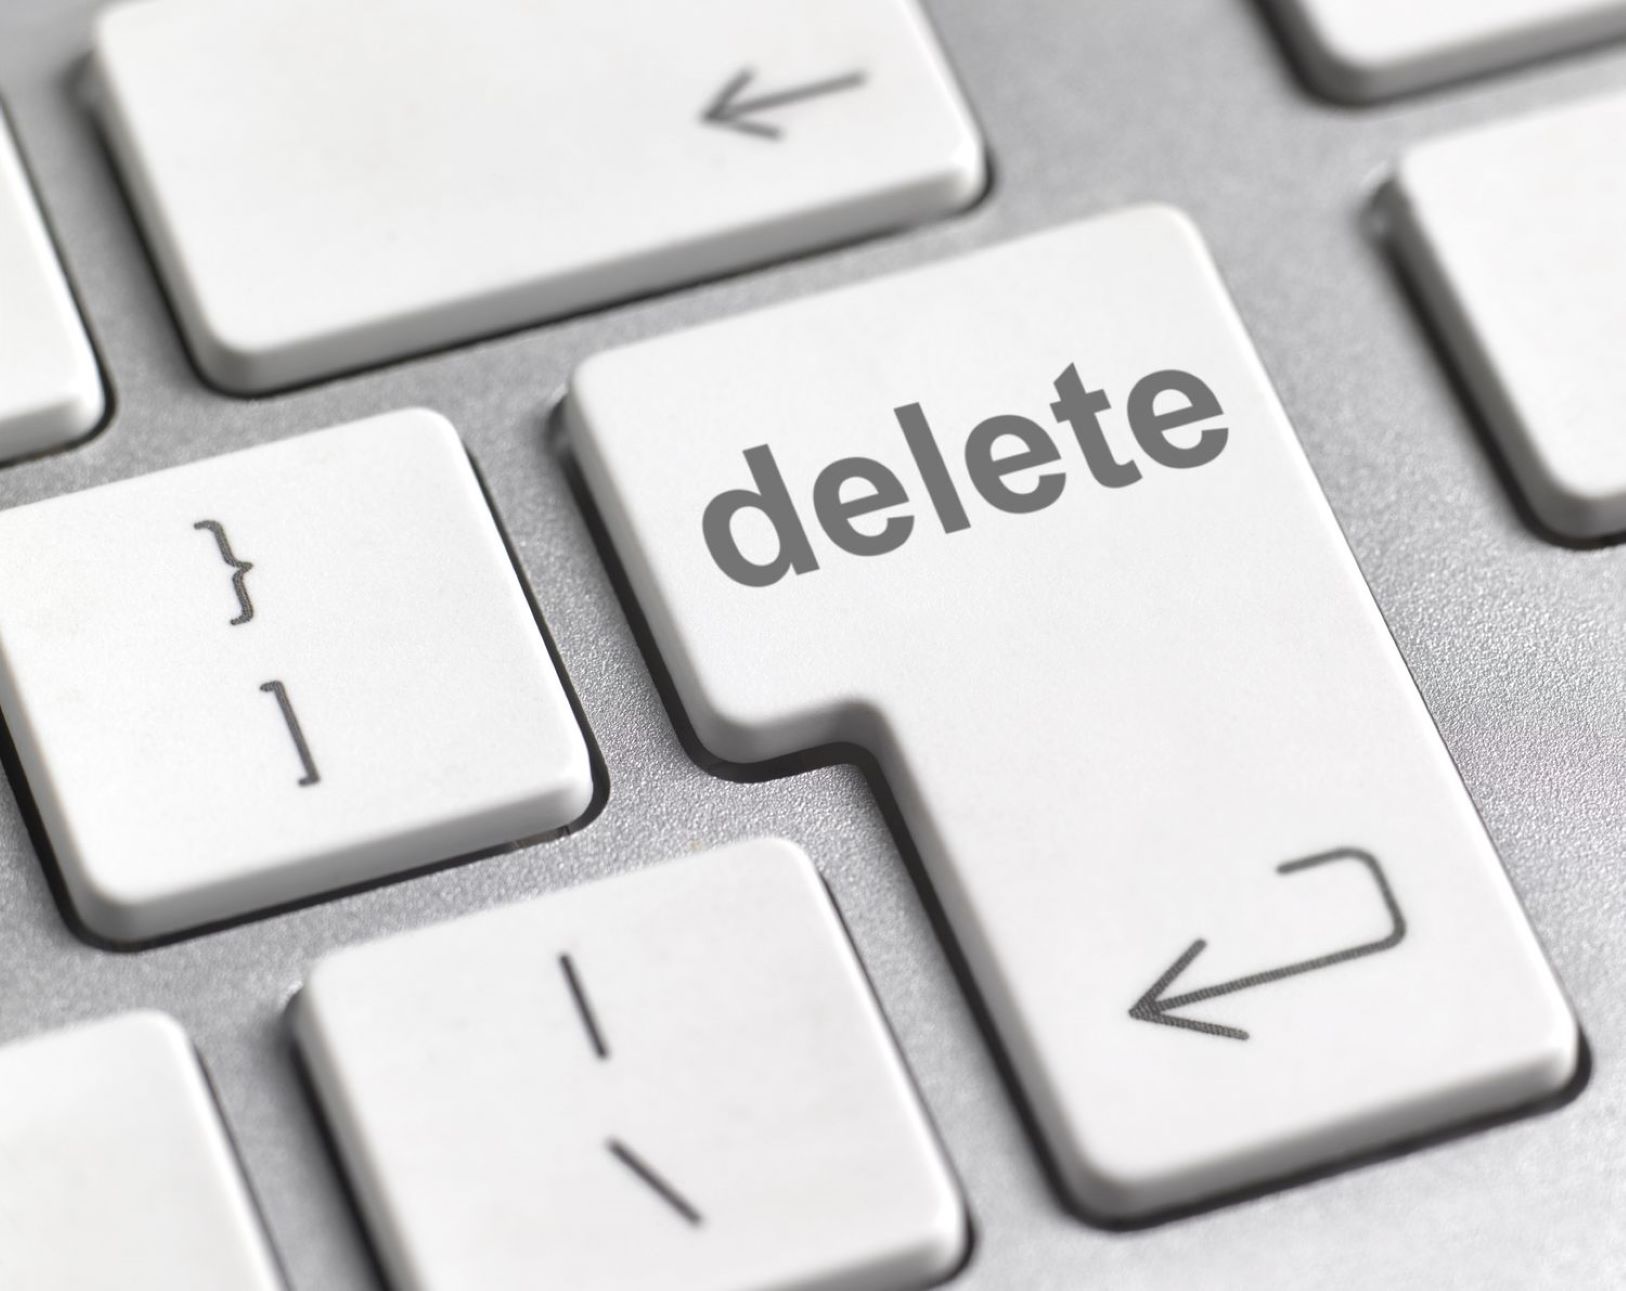 How To Force Delete A File On Windows 10